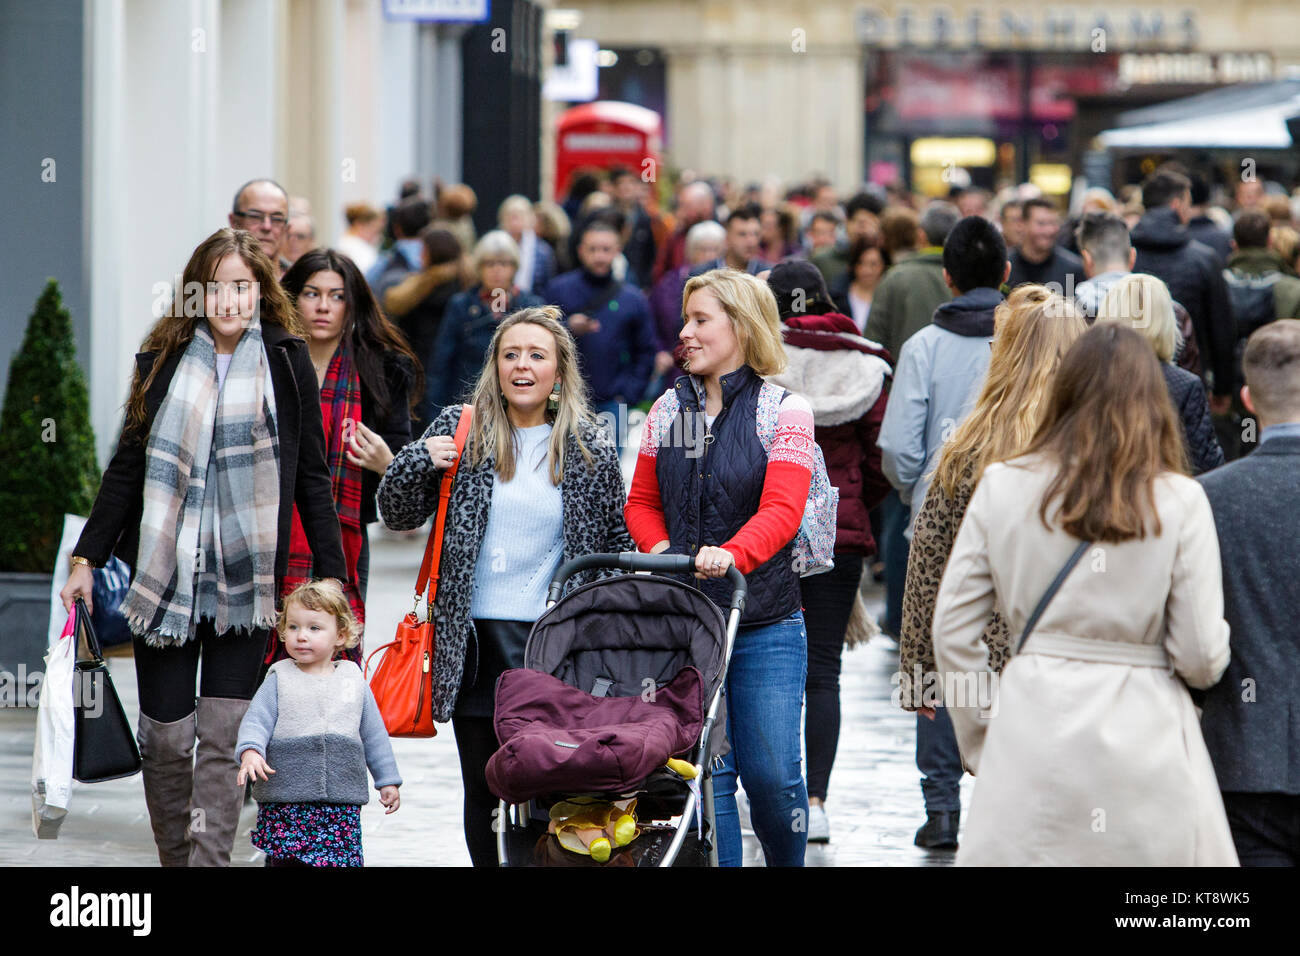 Bath, UK. 22nd Dec, 2017. With only three days left until Christmas day crowds of shoppers doing last minute shopping are pictured in Bath. Many shops have tried to attract customers by starting their sales early. Credit: lynchpics/Alamy Live News Stock Photo